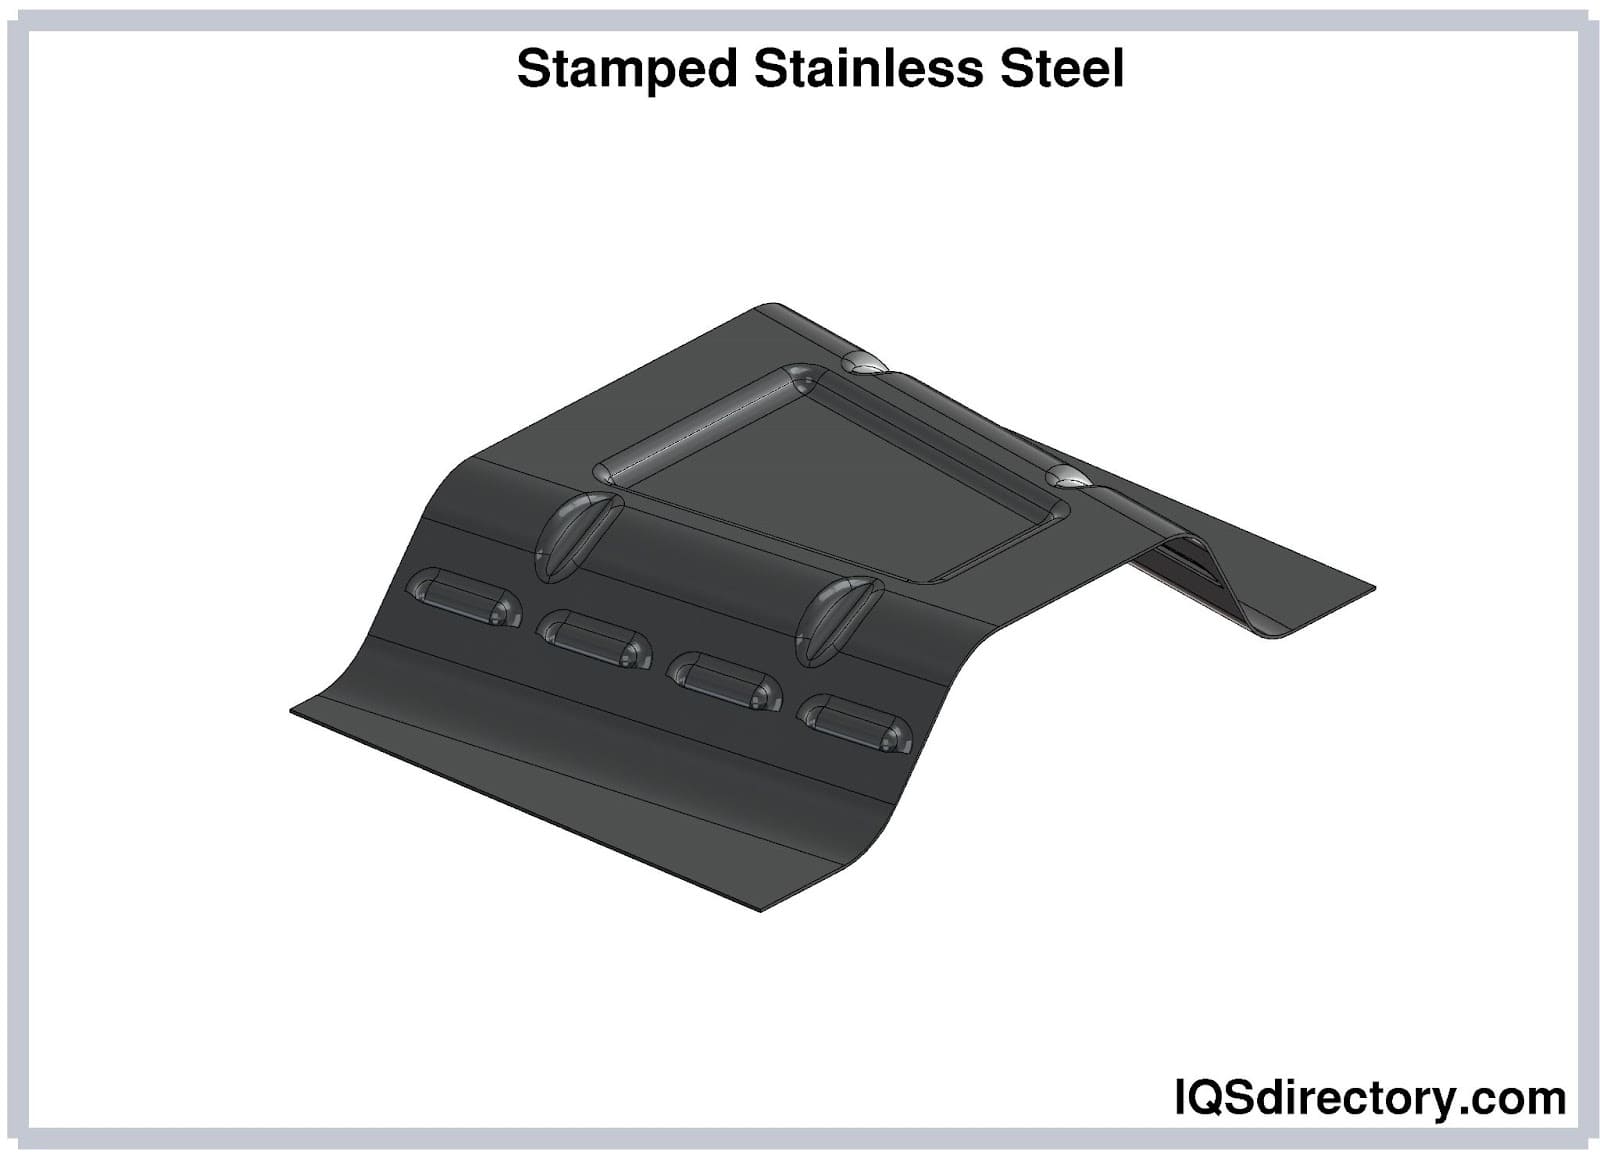 Stamped Stainless Steel